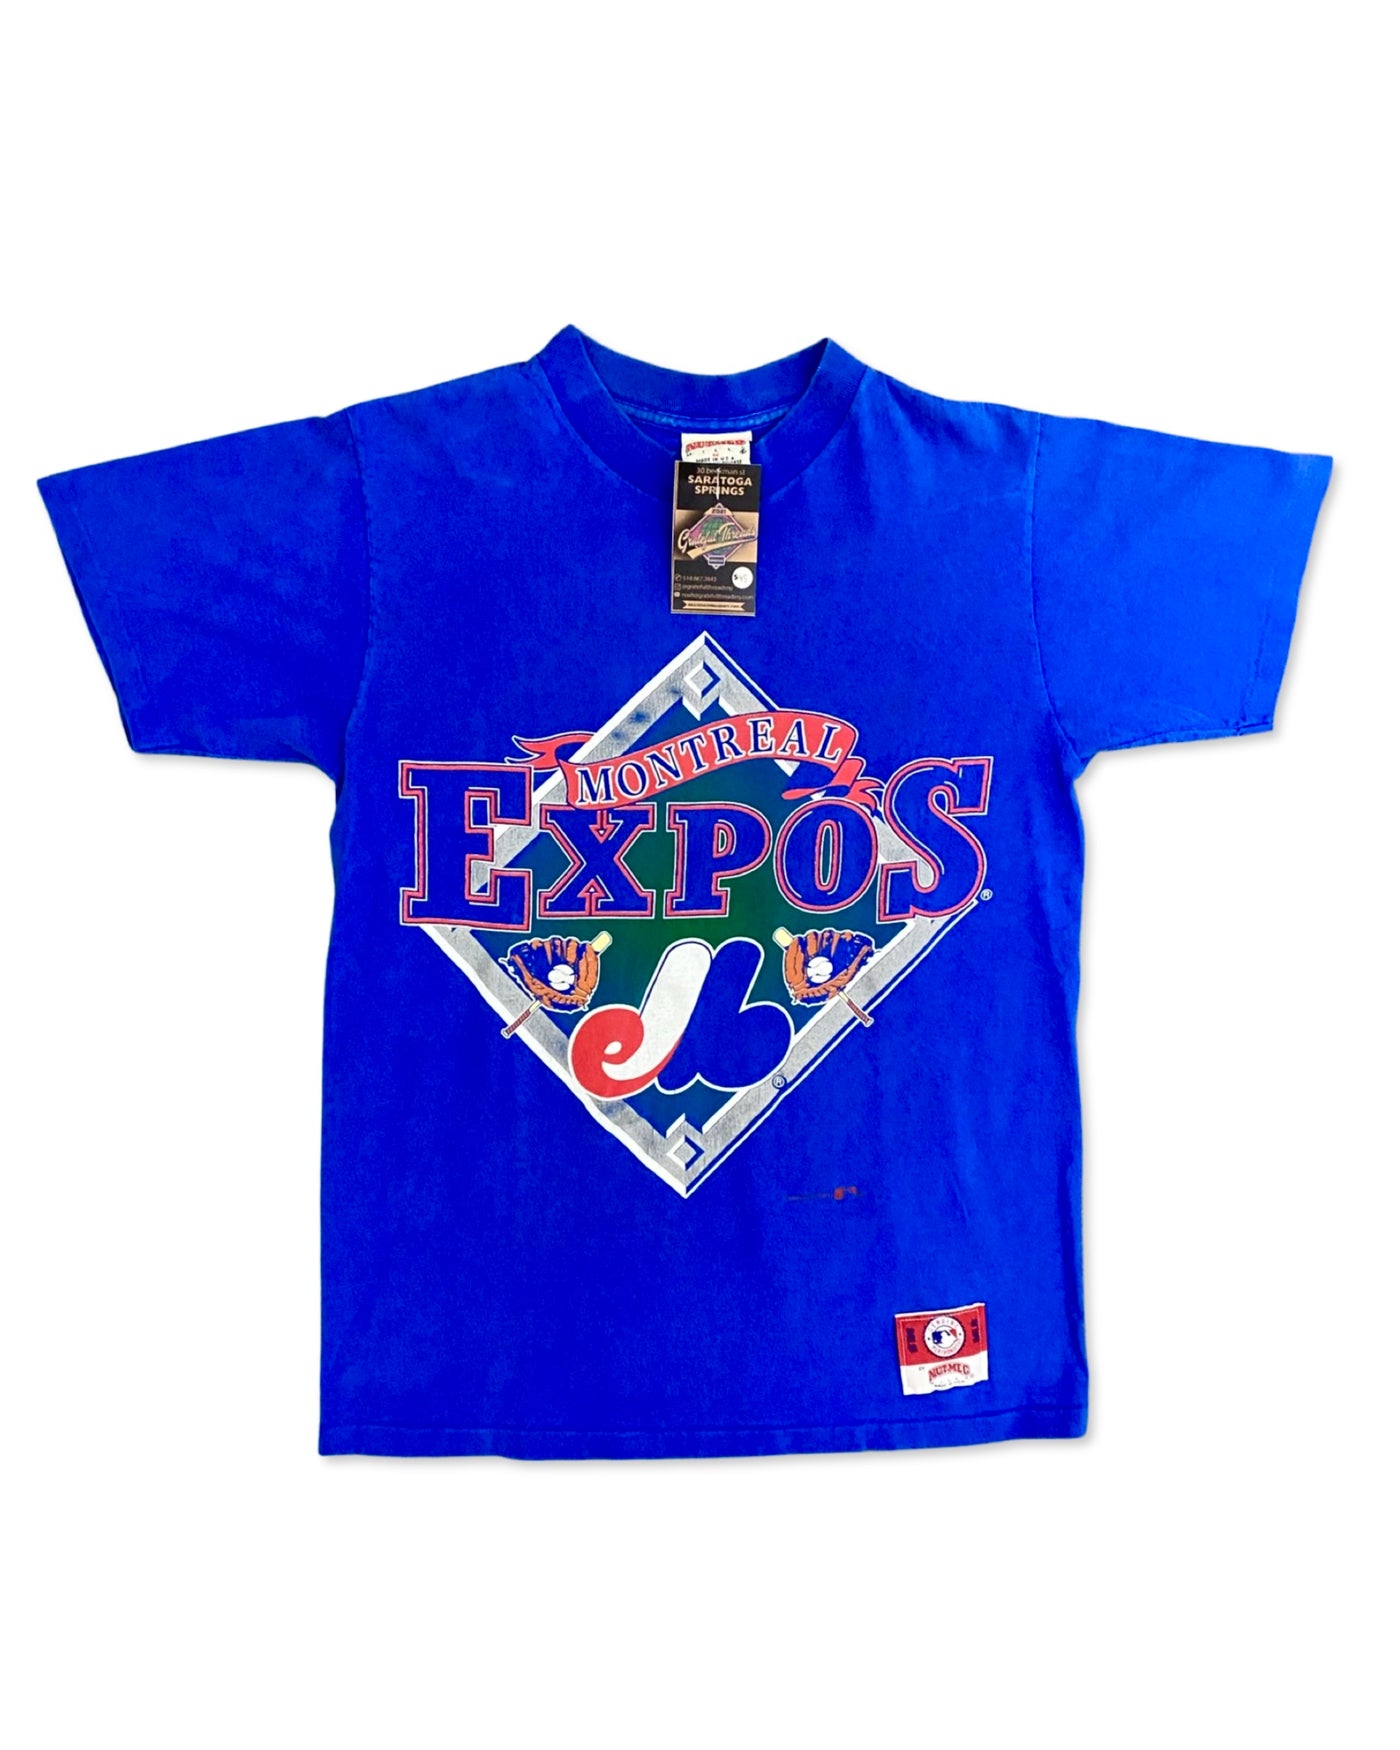 Vintage 90s Montreal Expos T-Shirt